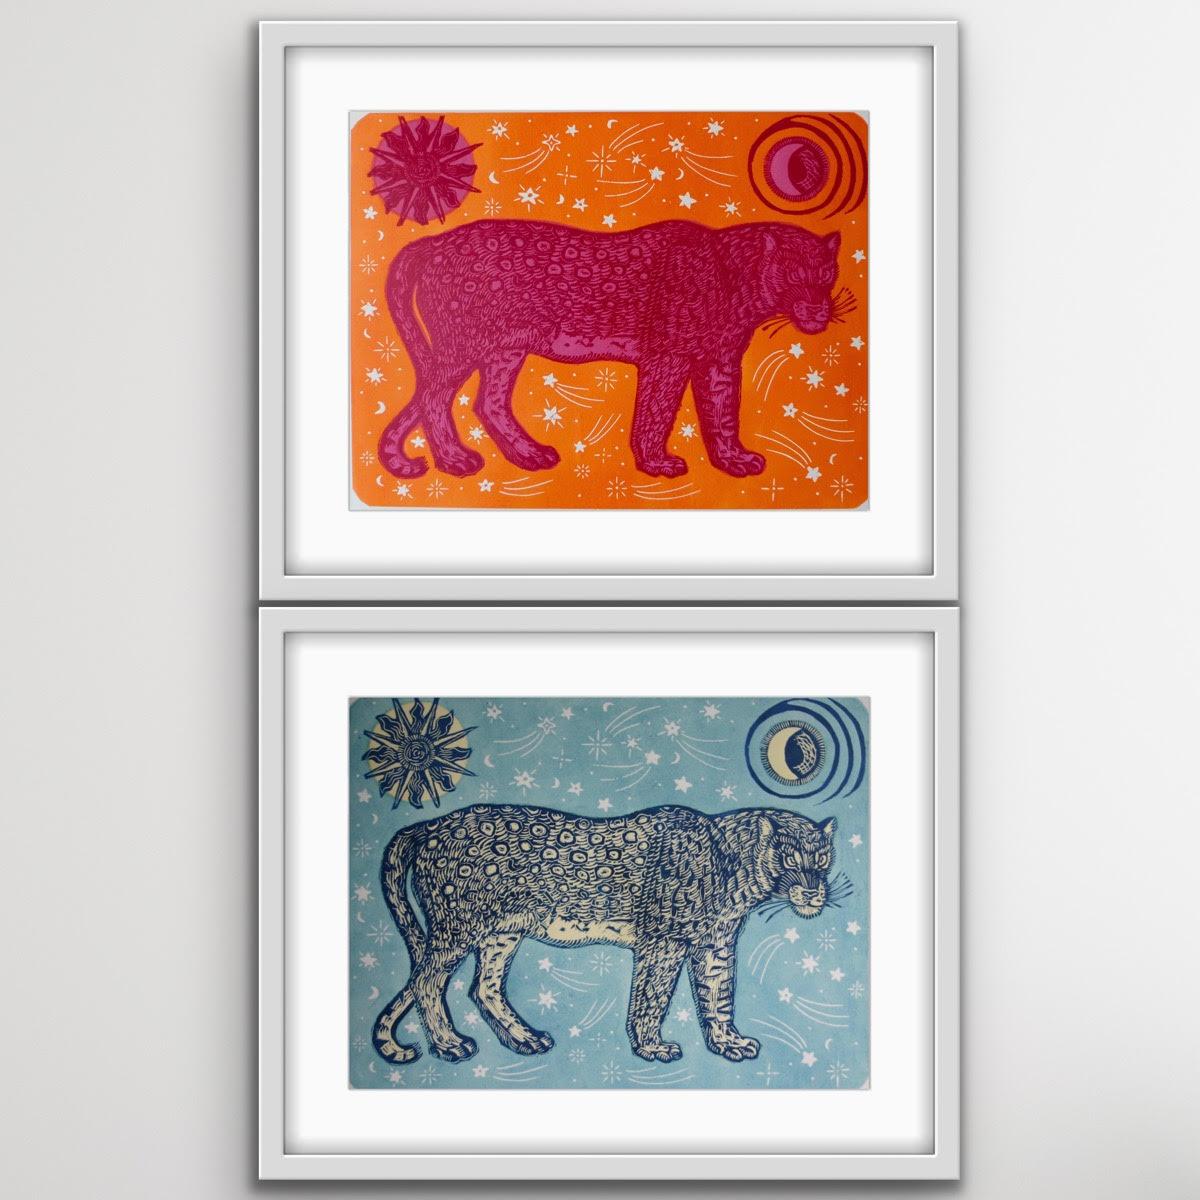 Kate Willows Animal Print - Moon Panther (blue and pink) Diptych